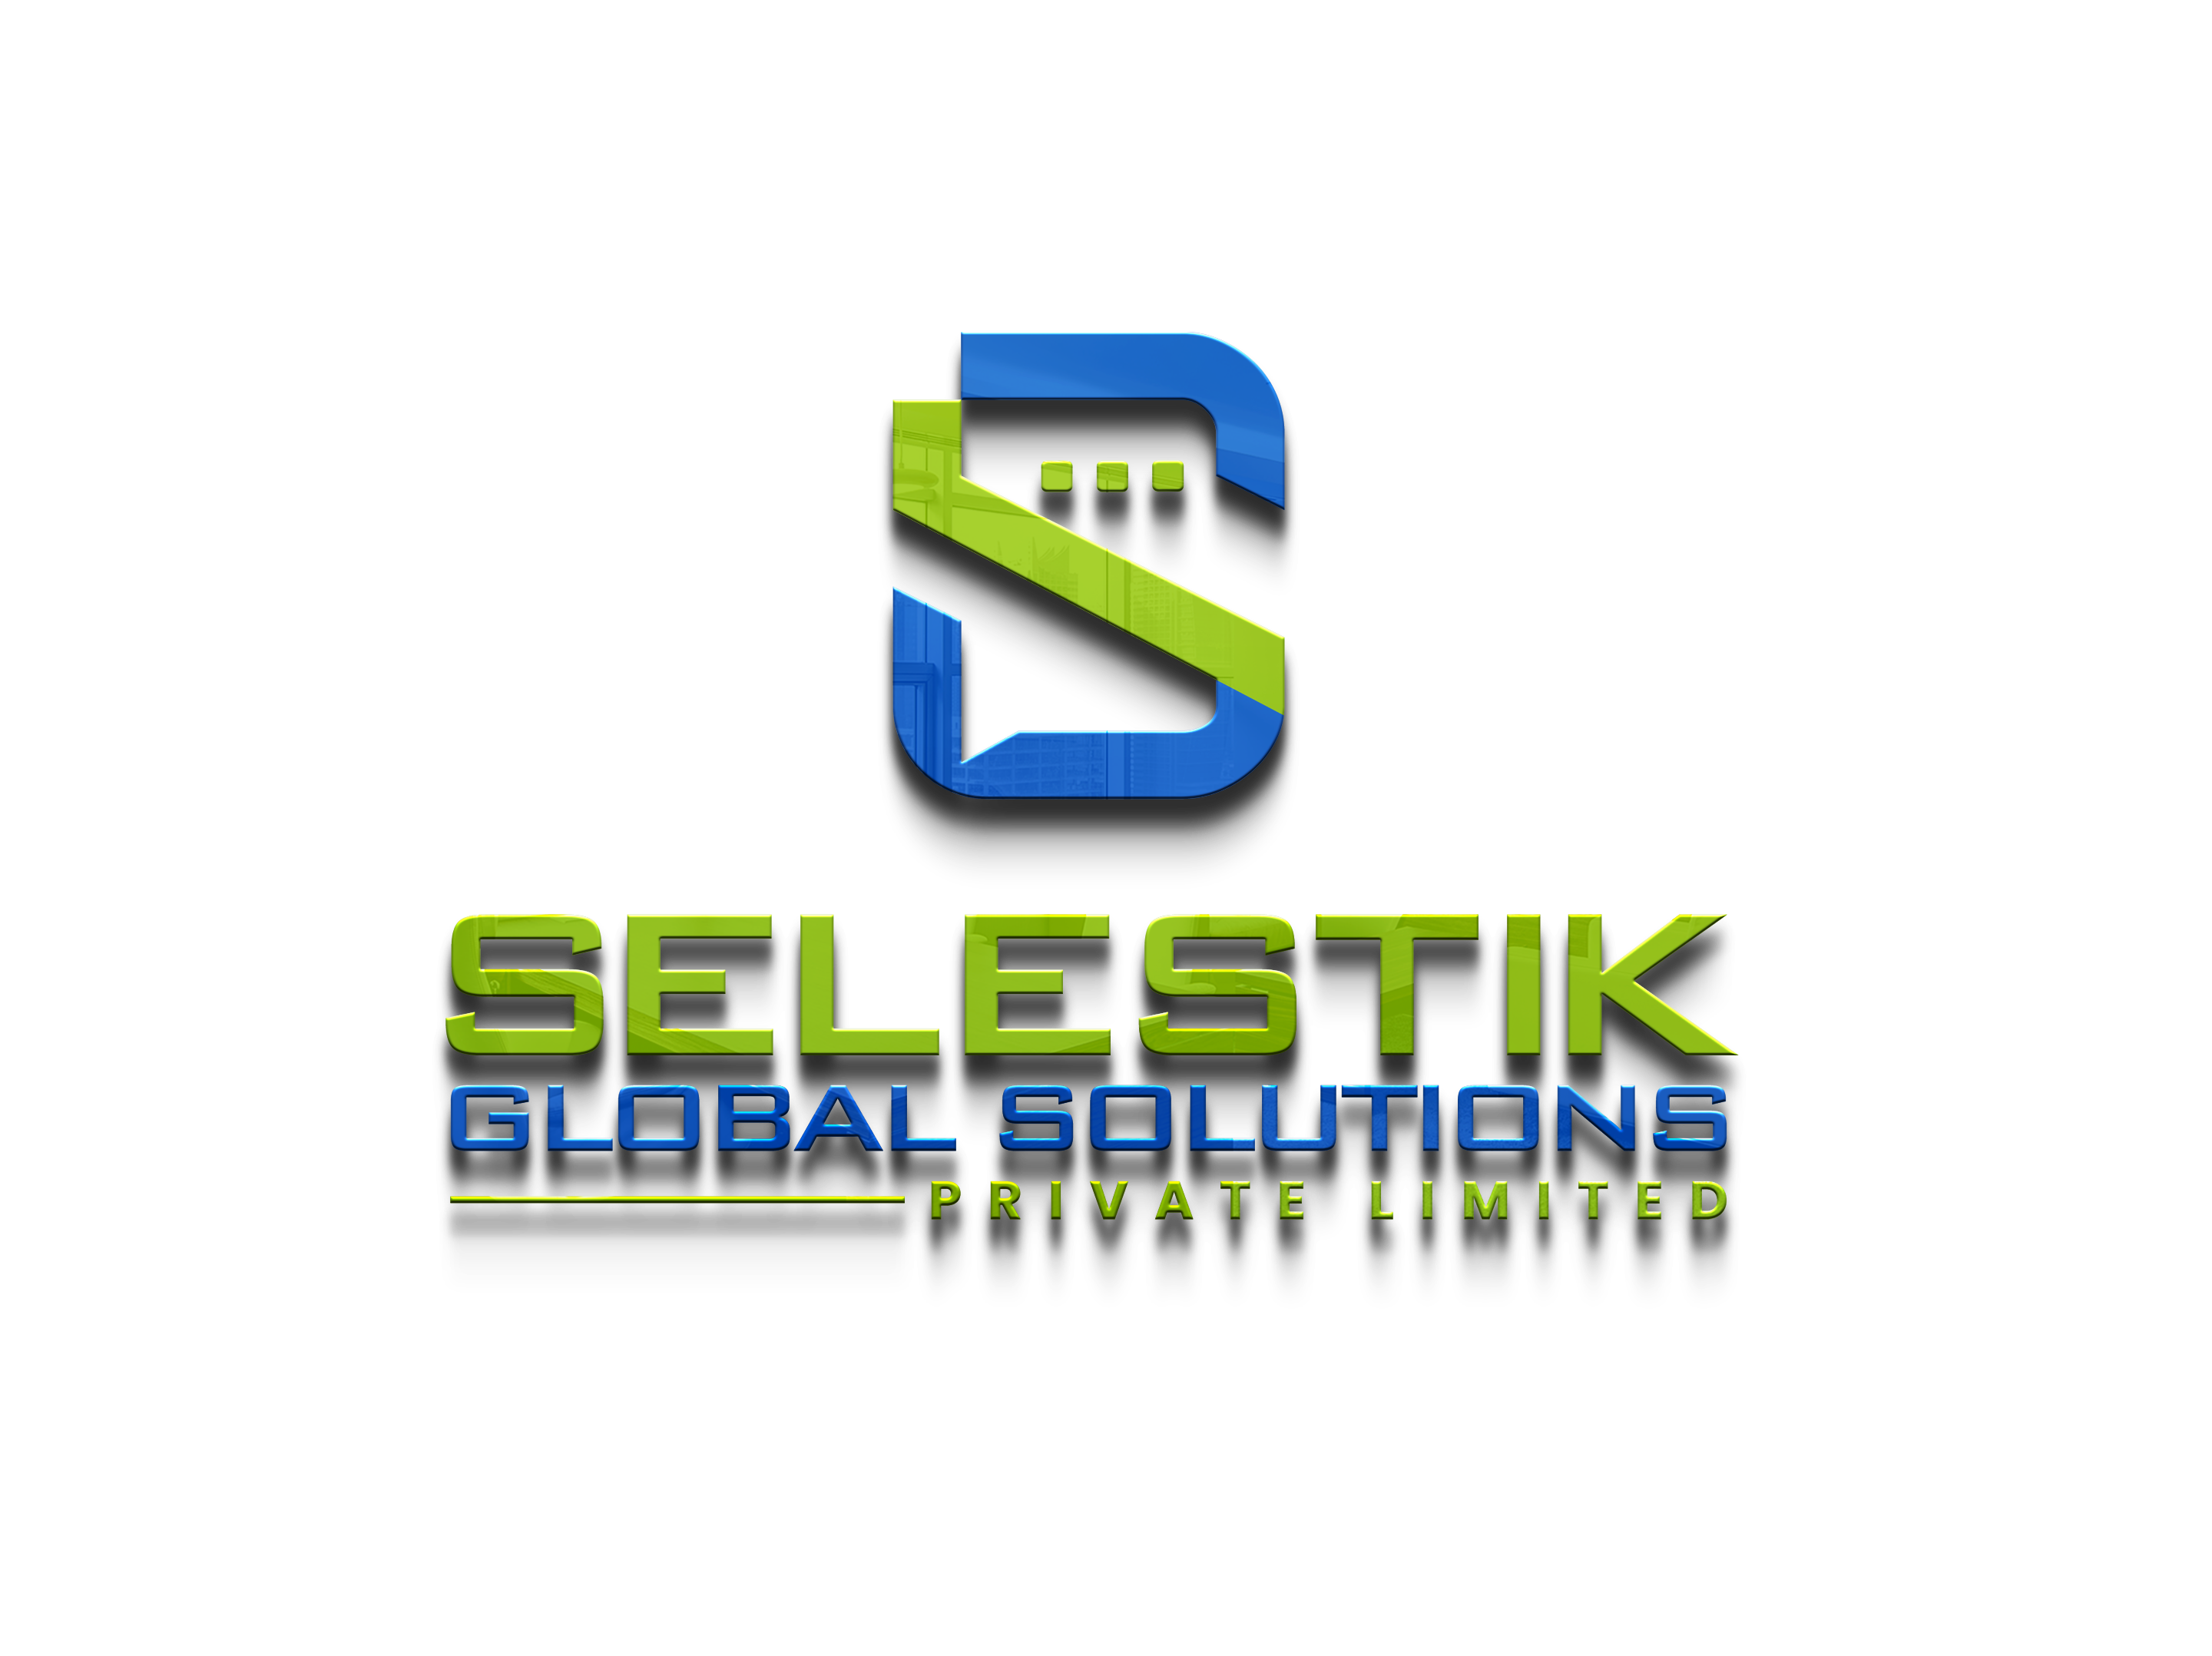 Selestik Global Solutions Private Limited